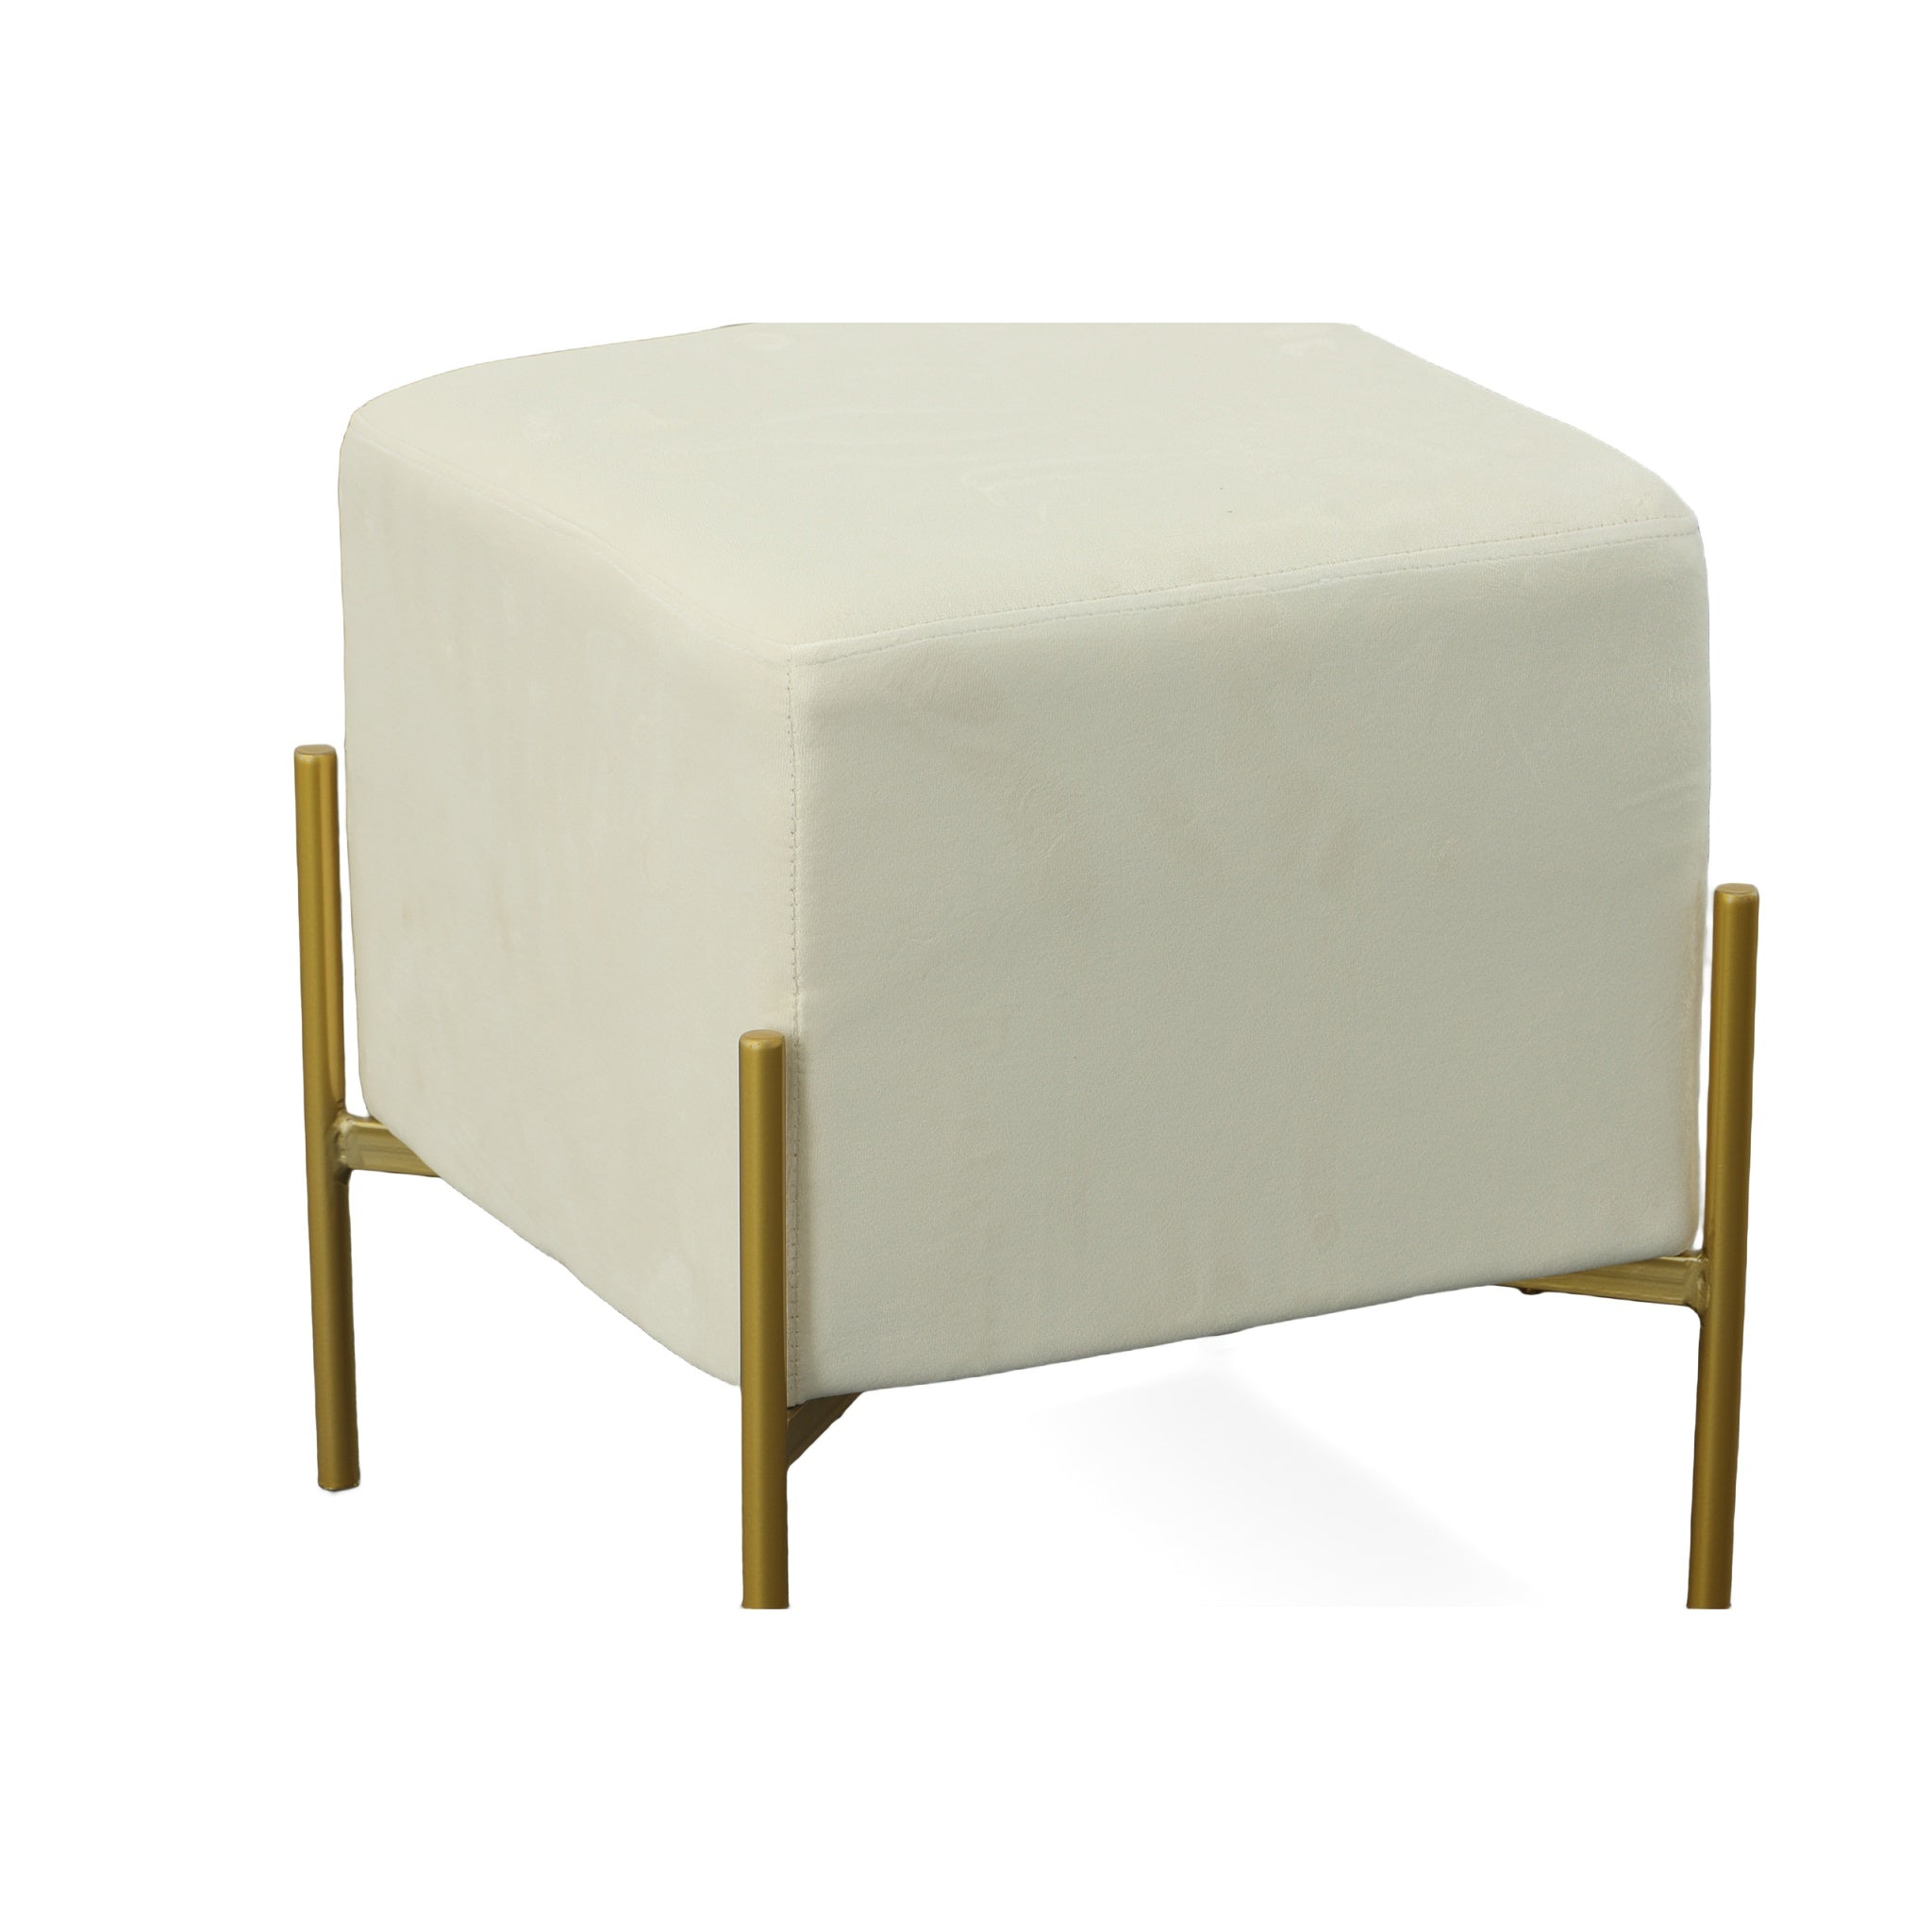 Larenta Upholstered Accent Stool/Footrest - Accent Stool